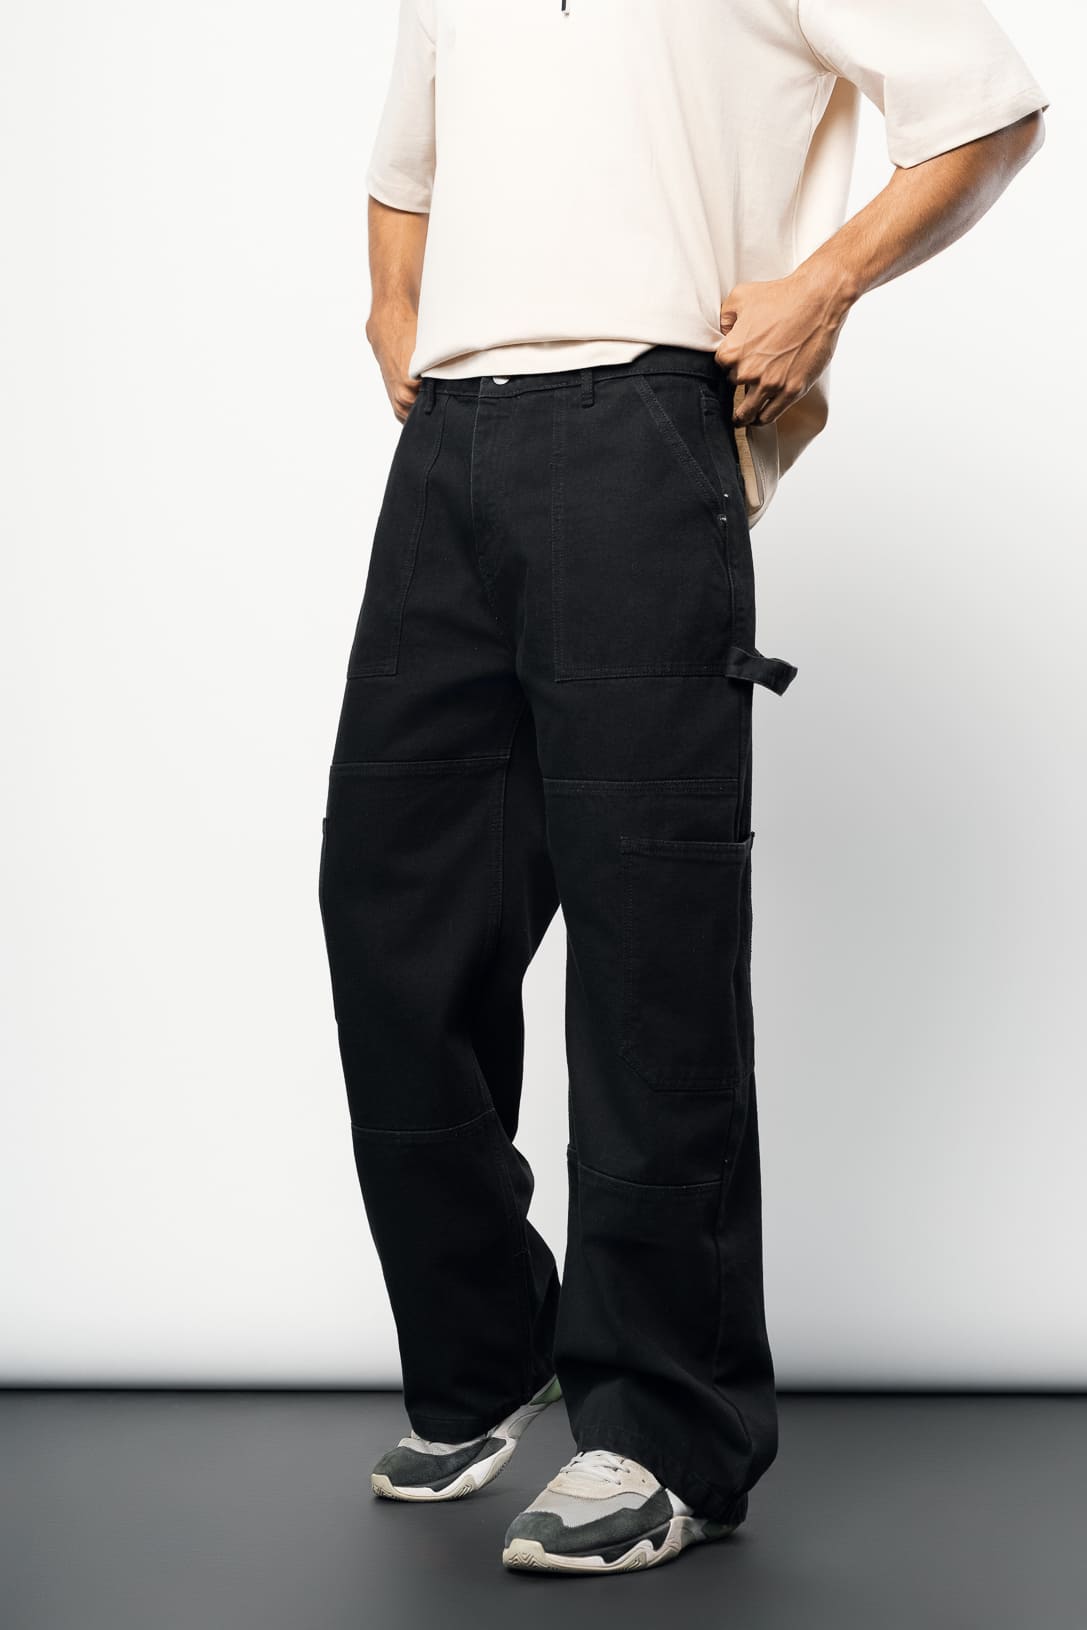 Buy Olive Green Trousers  Pants for Men by Rare Rabbit Online  Ajiocom